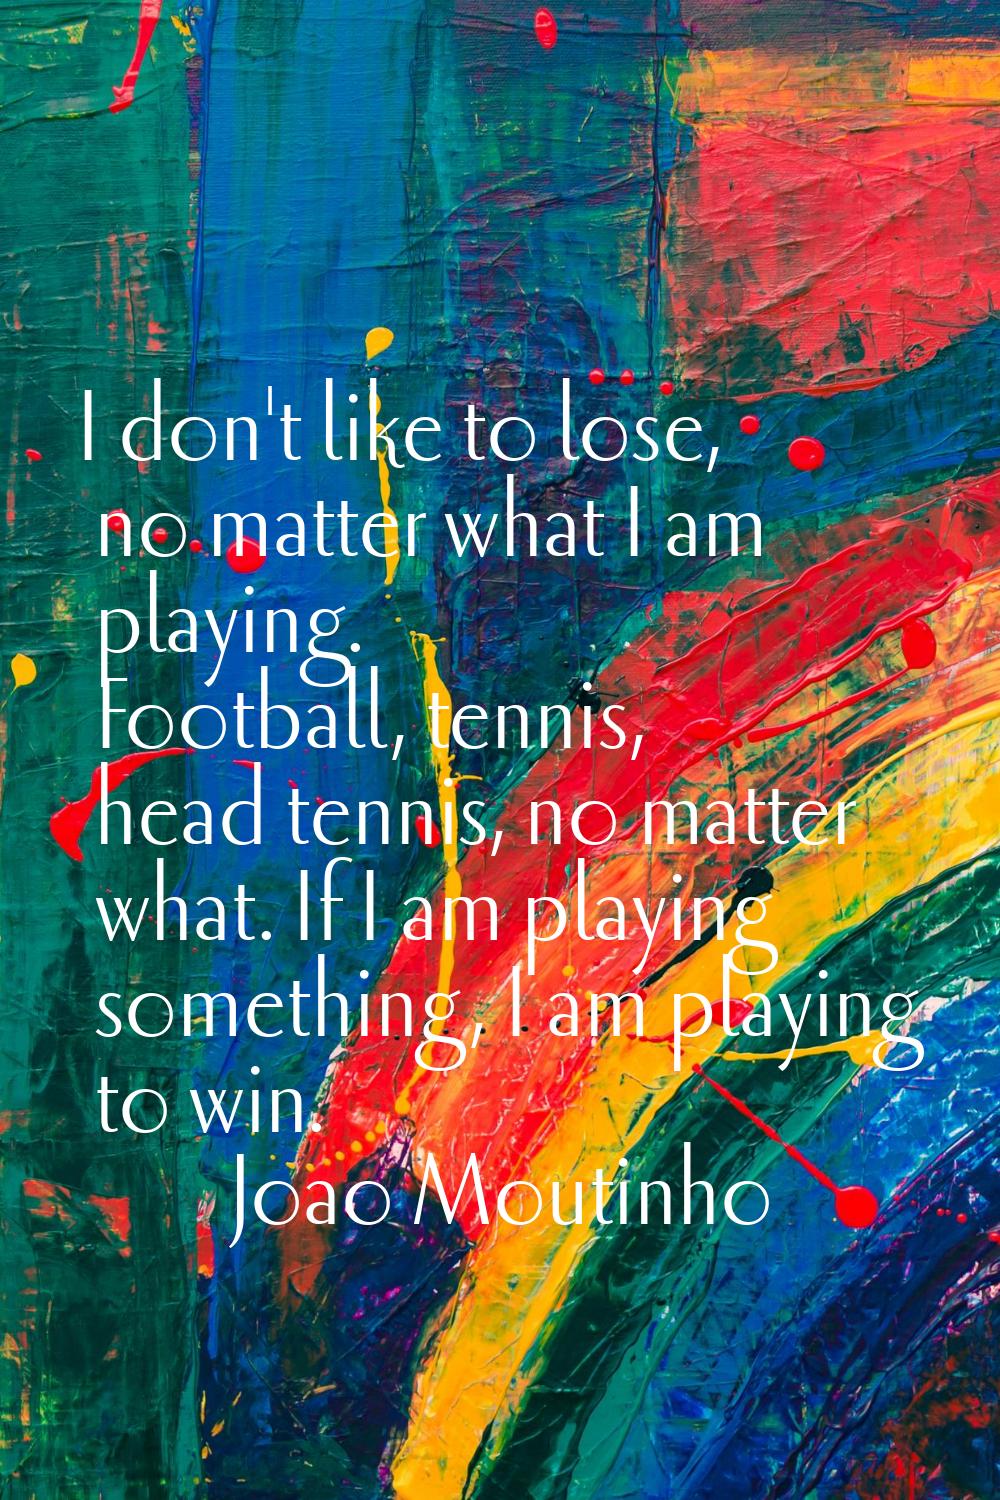 I don't like to lose, no matter what I am playing. Football, tennis, head tennis, no matter what. I